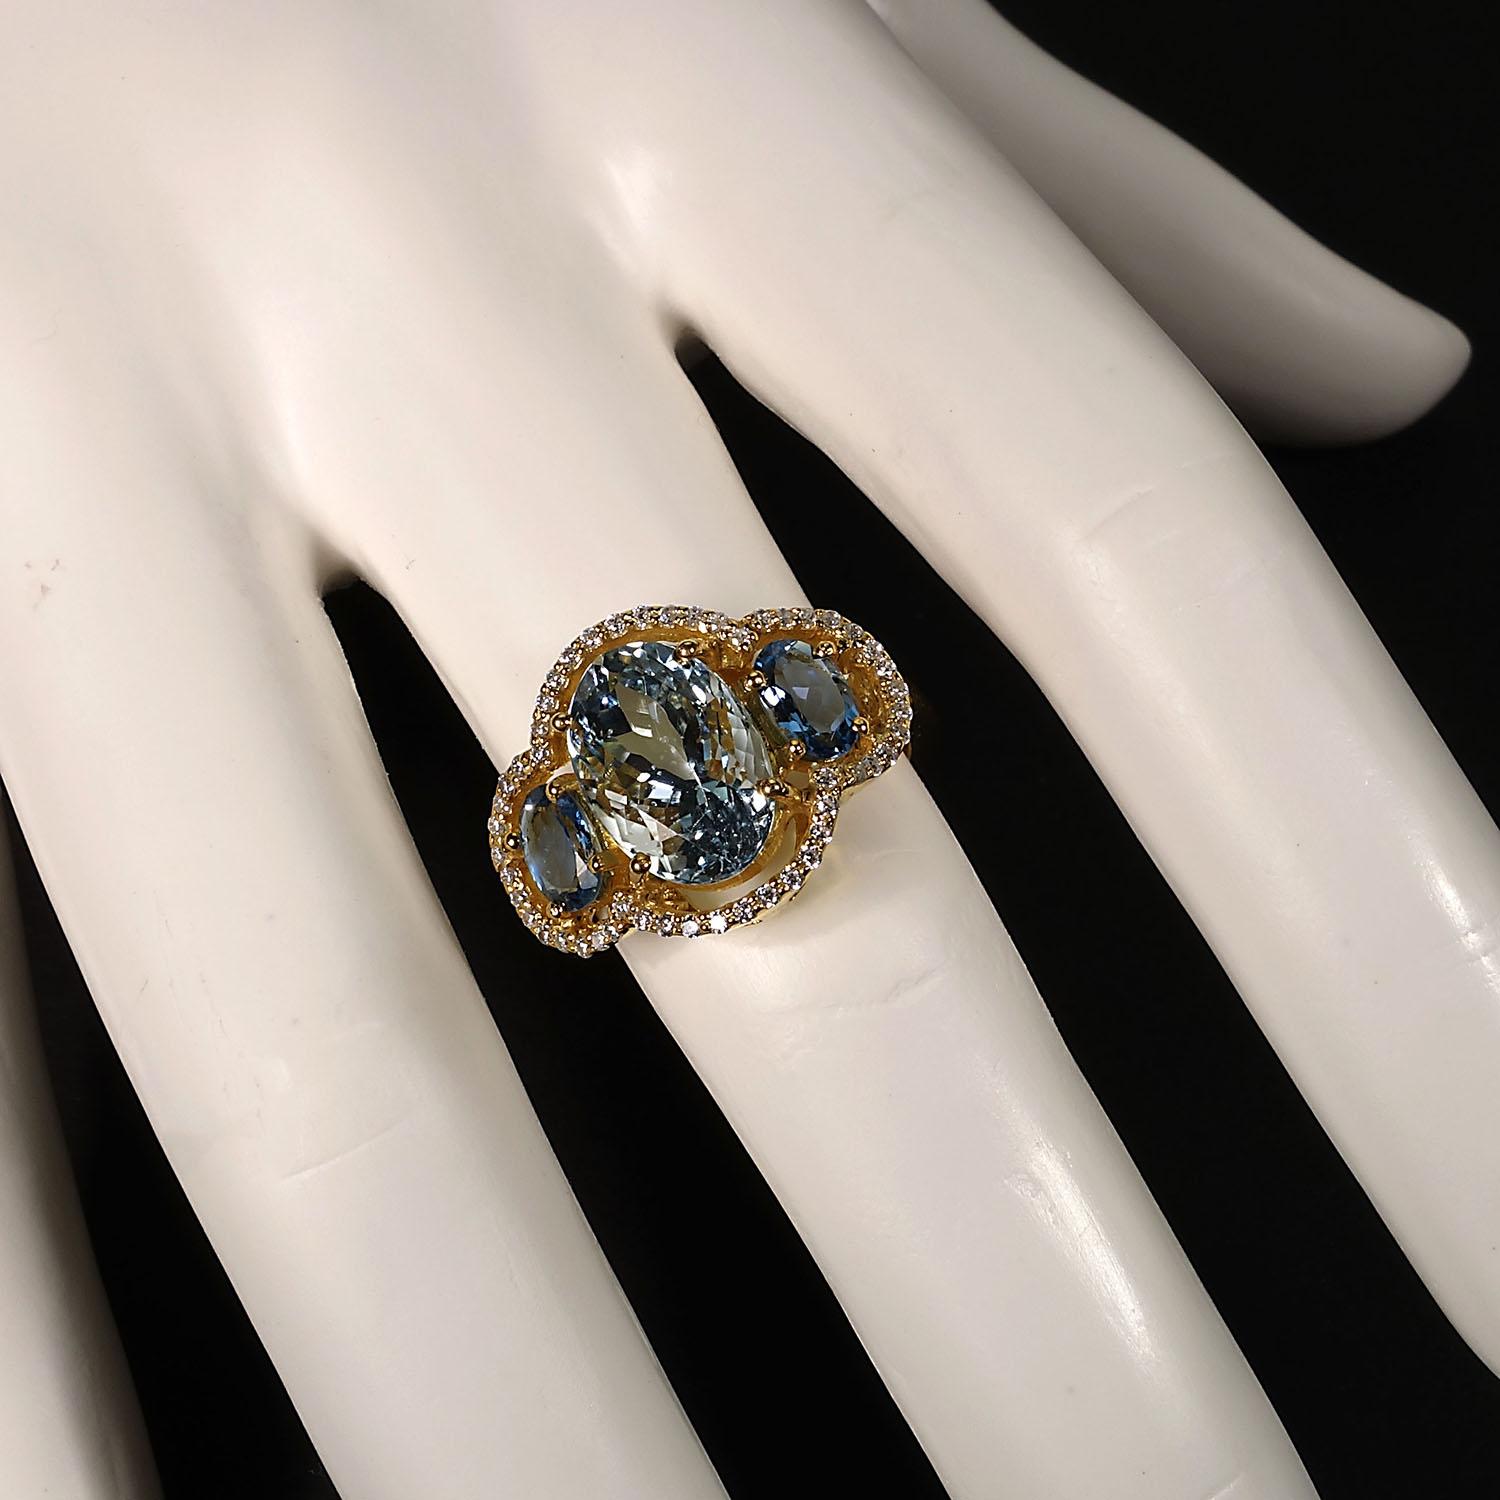 Artisan Gemjunky Sparkling Cocktail Ring of Three Aquamarines with Cambodian Zircon Halo